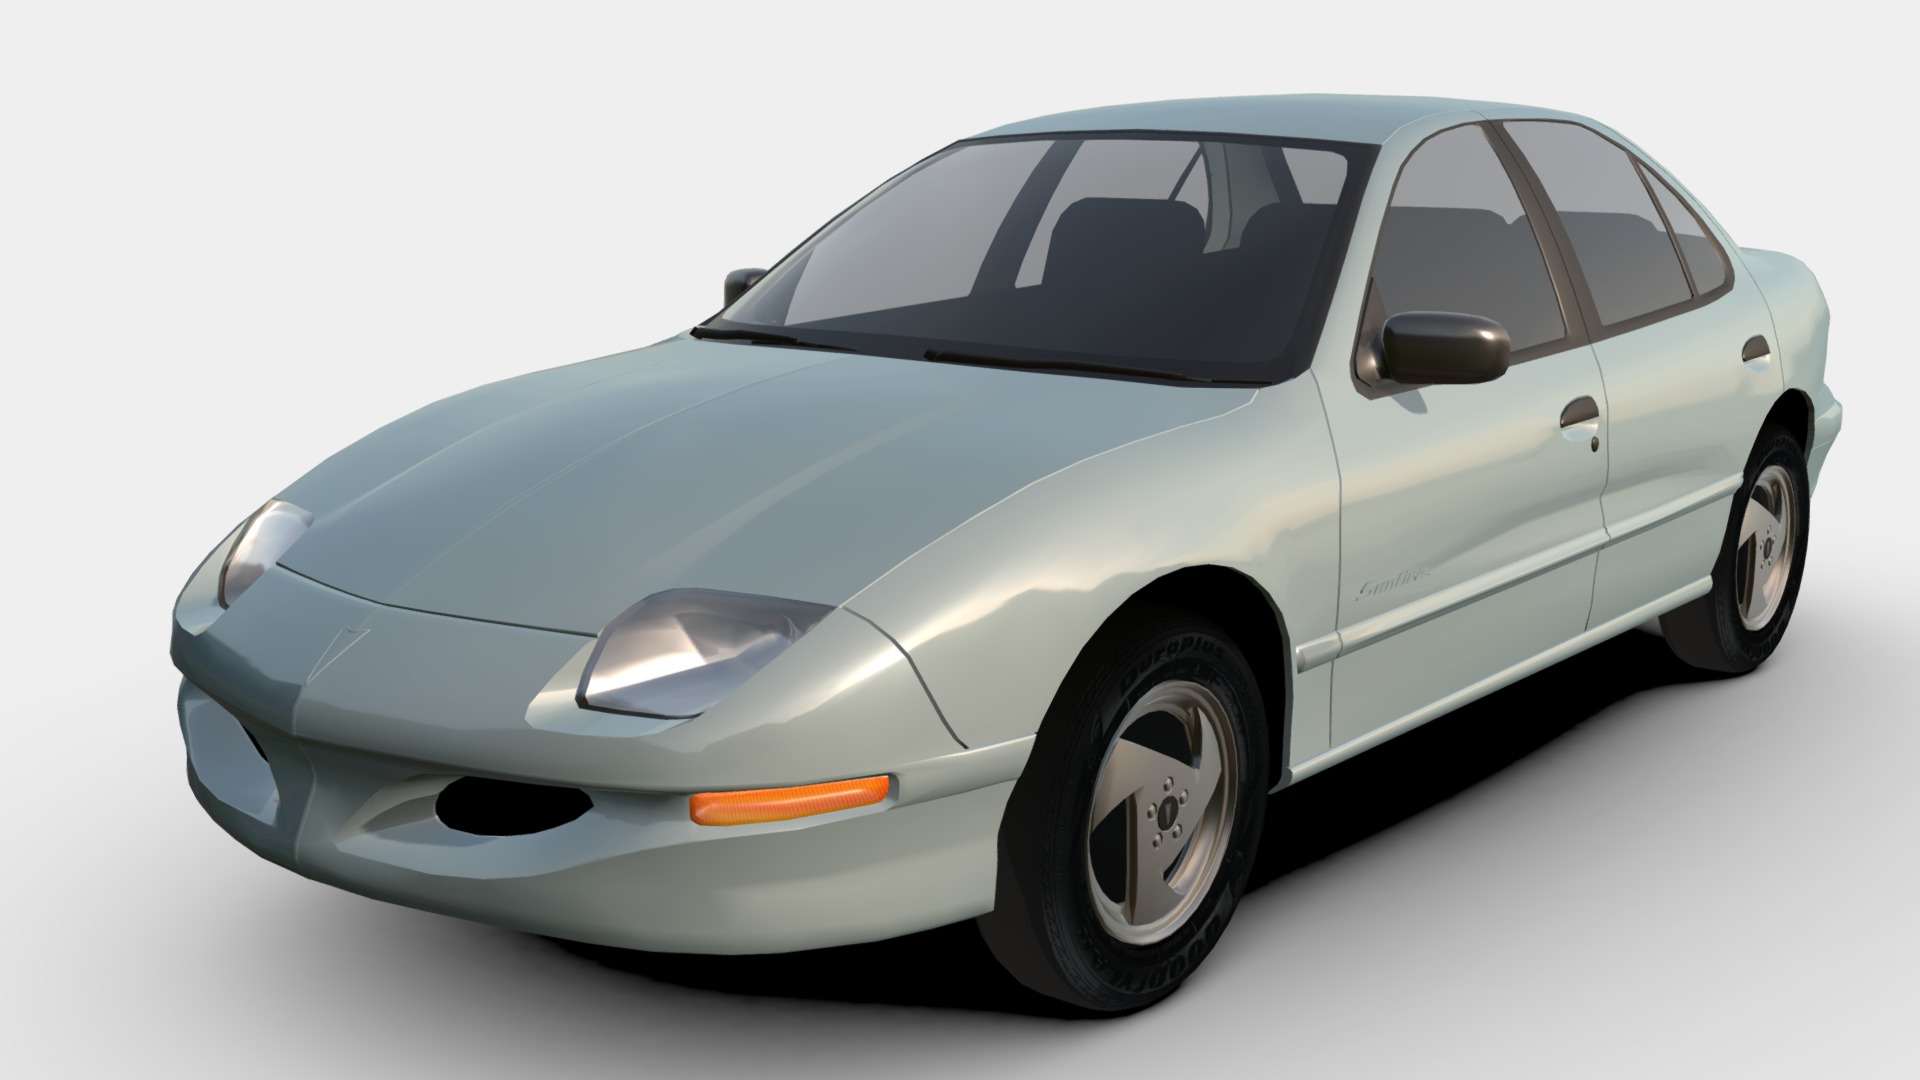 3D model 1995 Pontiac Sunfire Sedan - This is a 3D model of the 1995 Pontiac Sunfire Sedan. The 3D model is about a silver car with a white background.